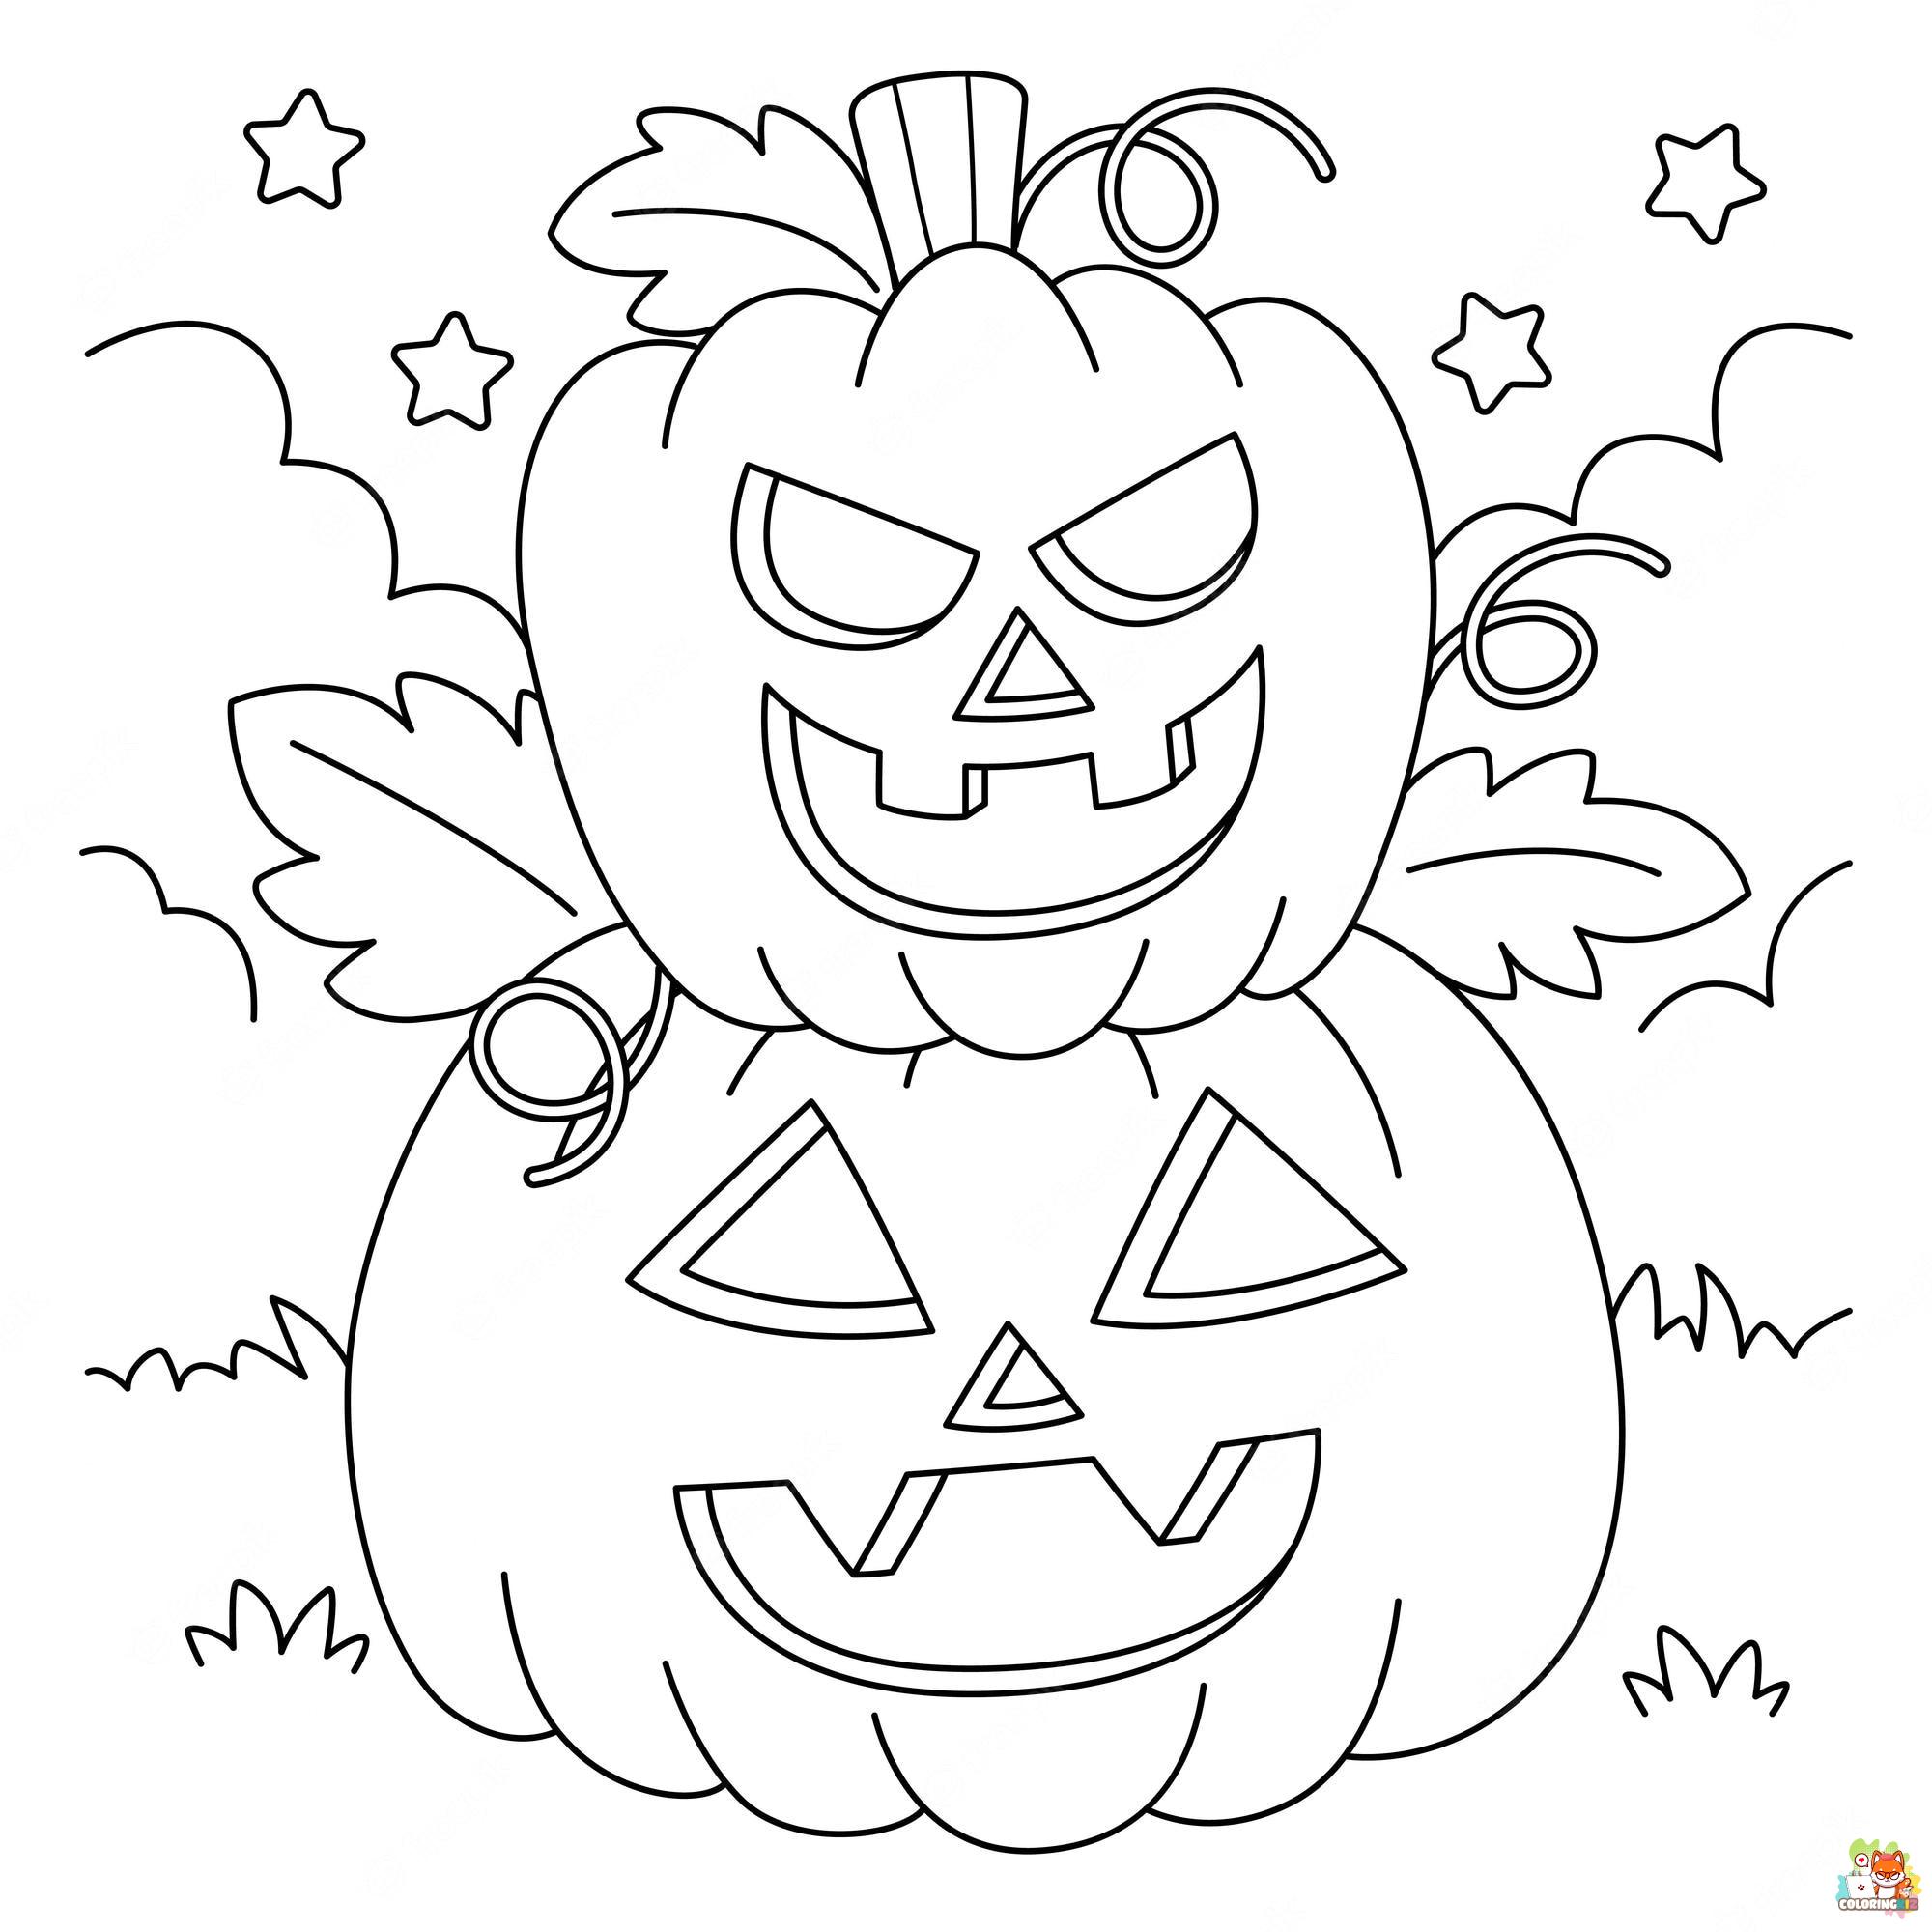 Pumpkin Halloween Coloring Pages 2